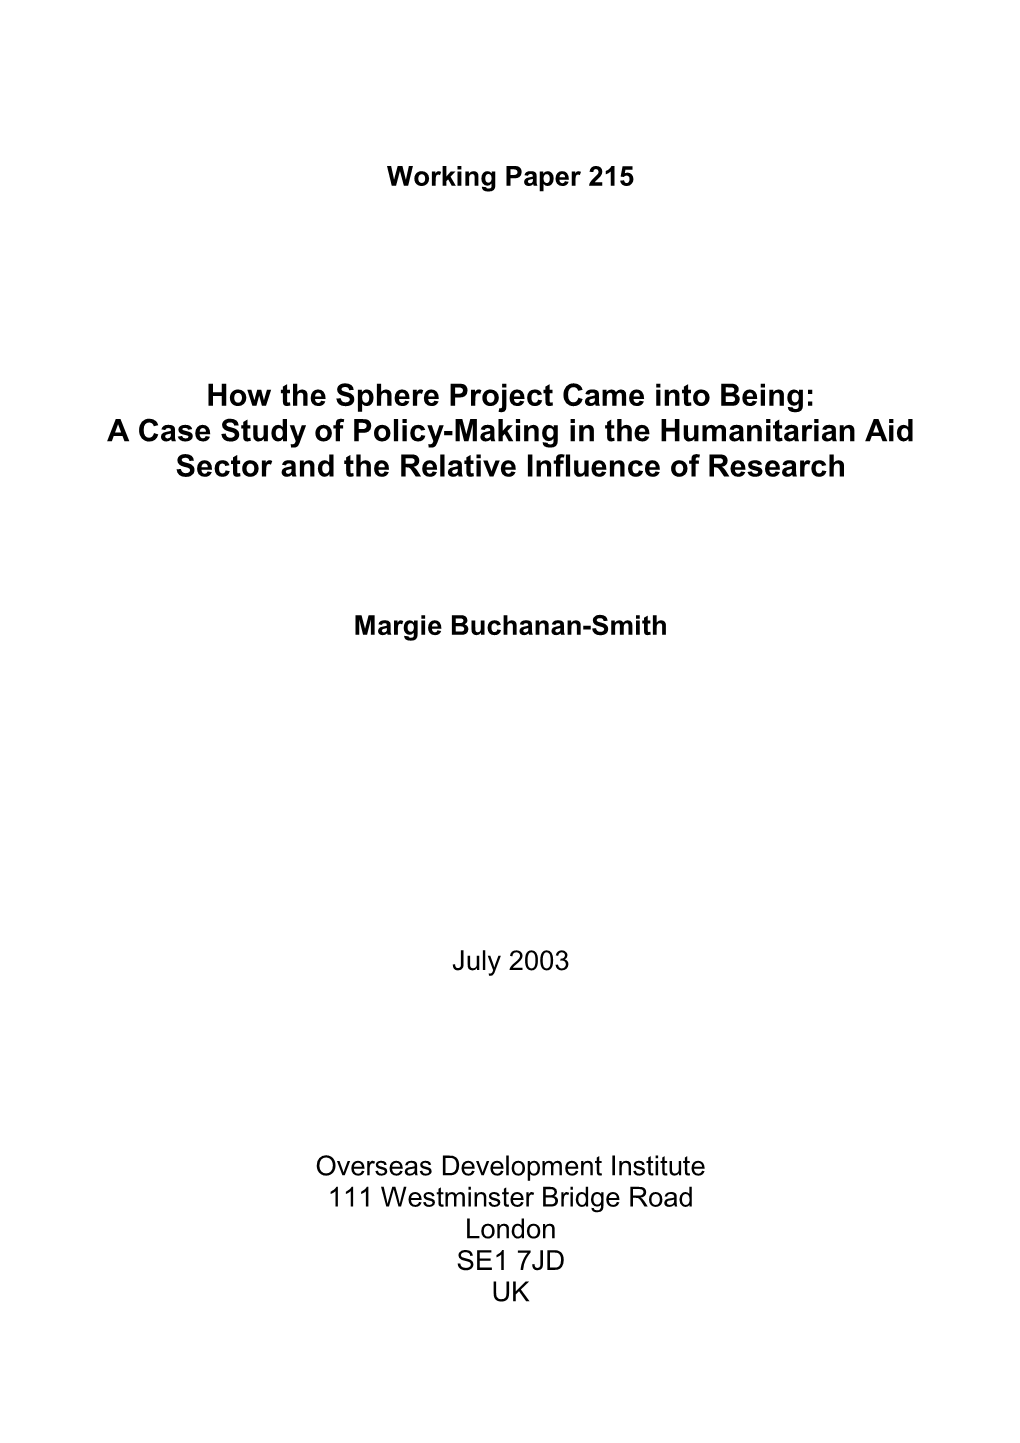 A Case Study of Policy-Making in the Humanitarian Aid Sector and the Relative Influence of Research